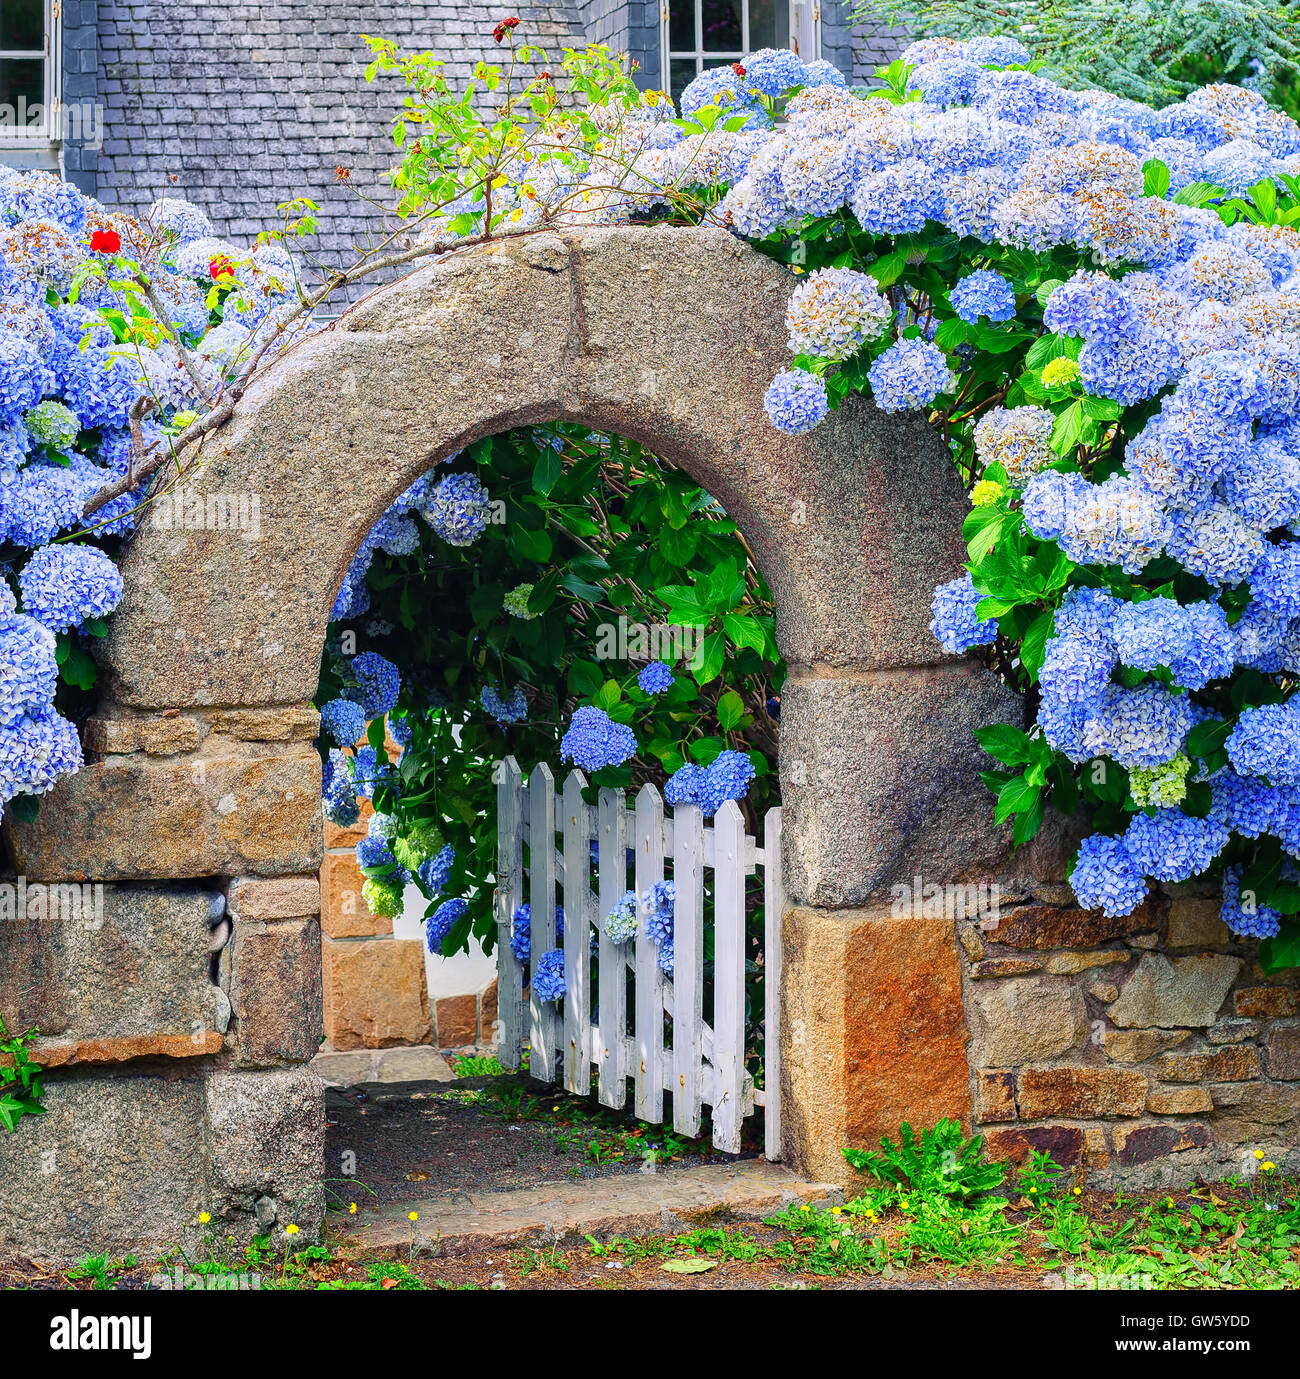 Blue hydrangea flowers decorating a stone house gate in Brittany, France Stock Photo